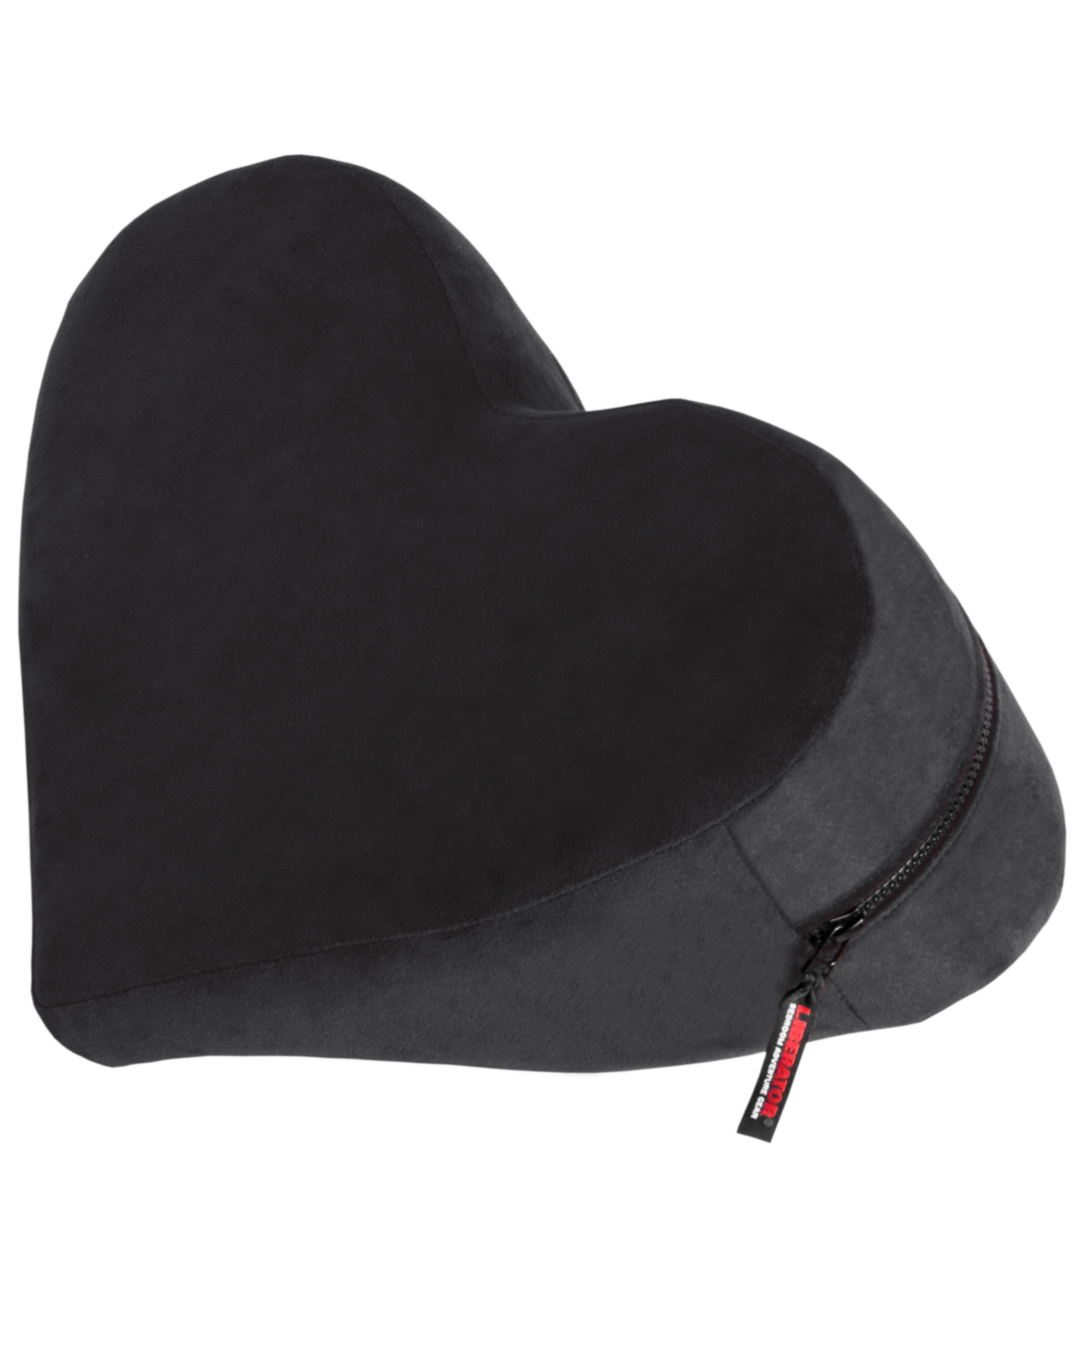 Liberator Decor Heart Wedge Sex Positioning Cushion - Assorted Colors black